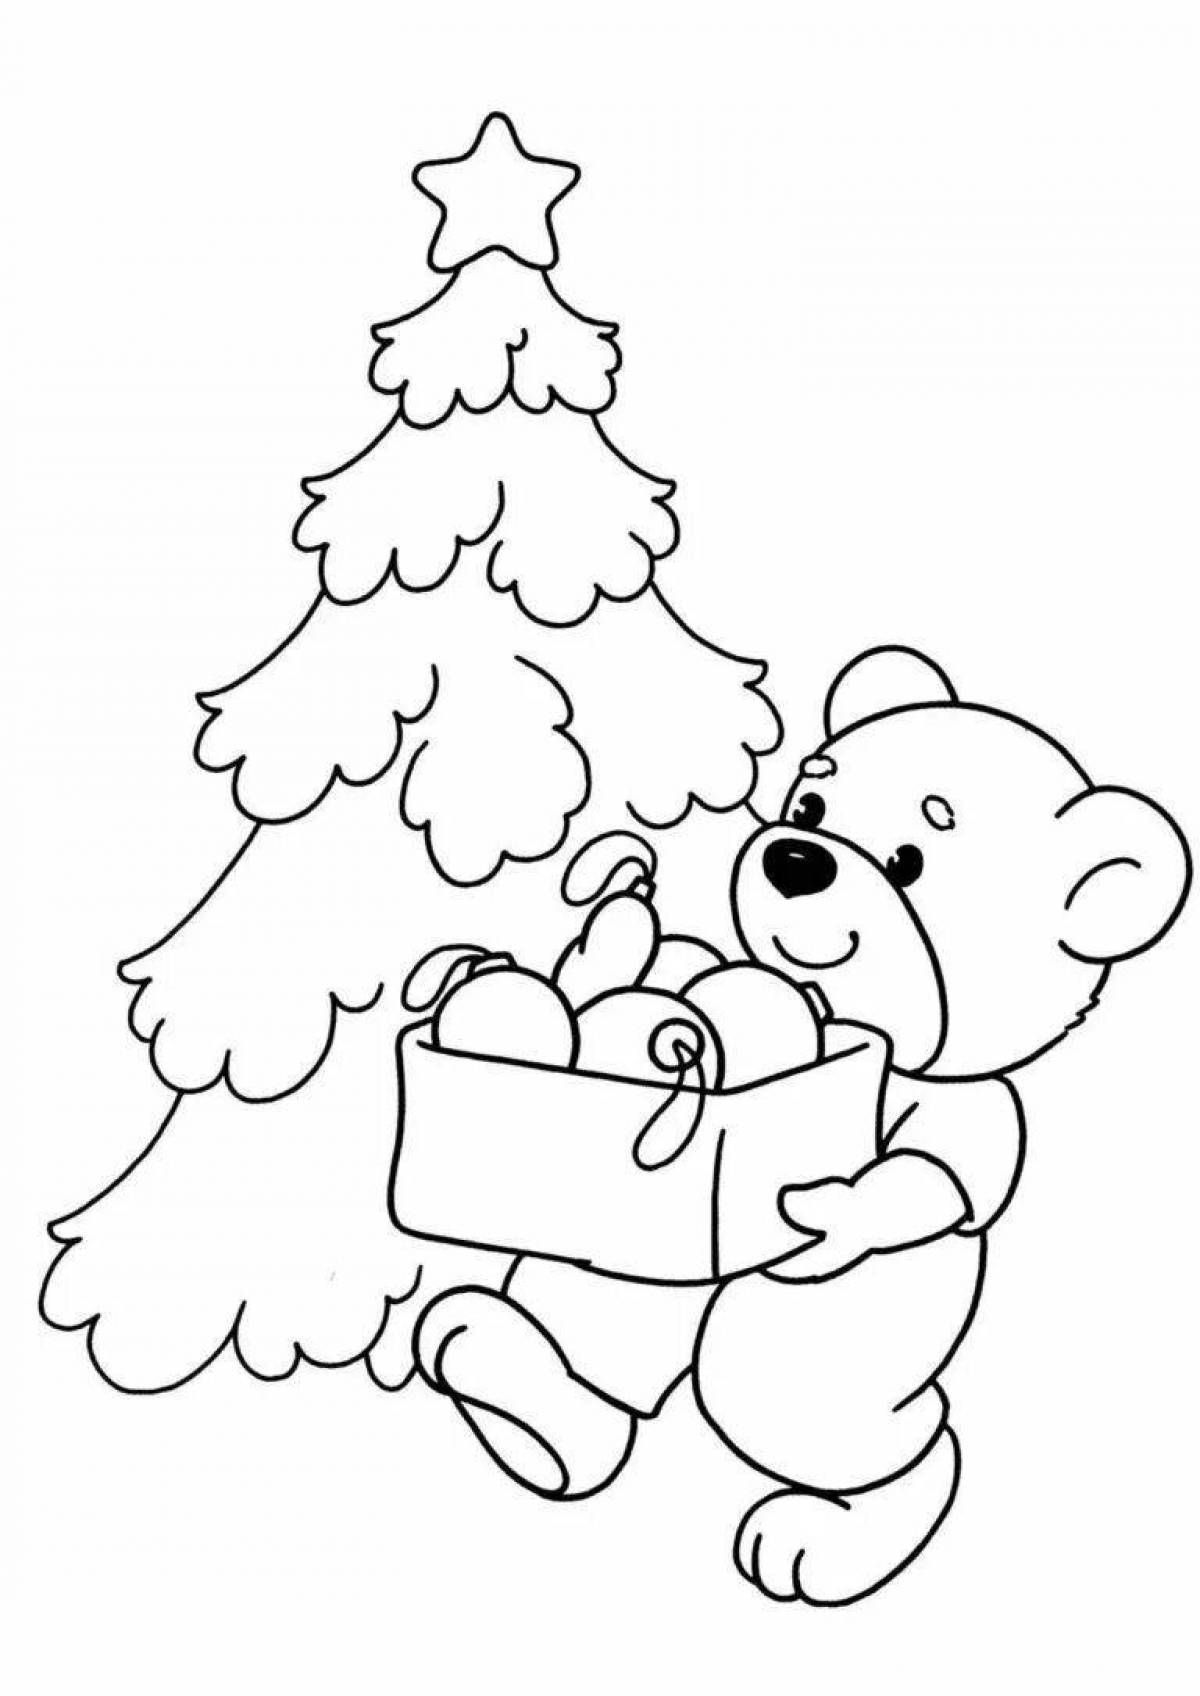 Playful children's Christmas drawing